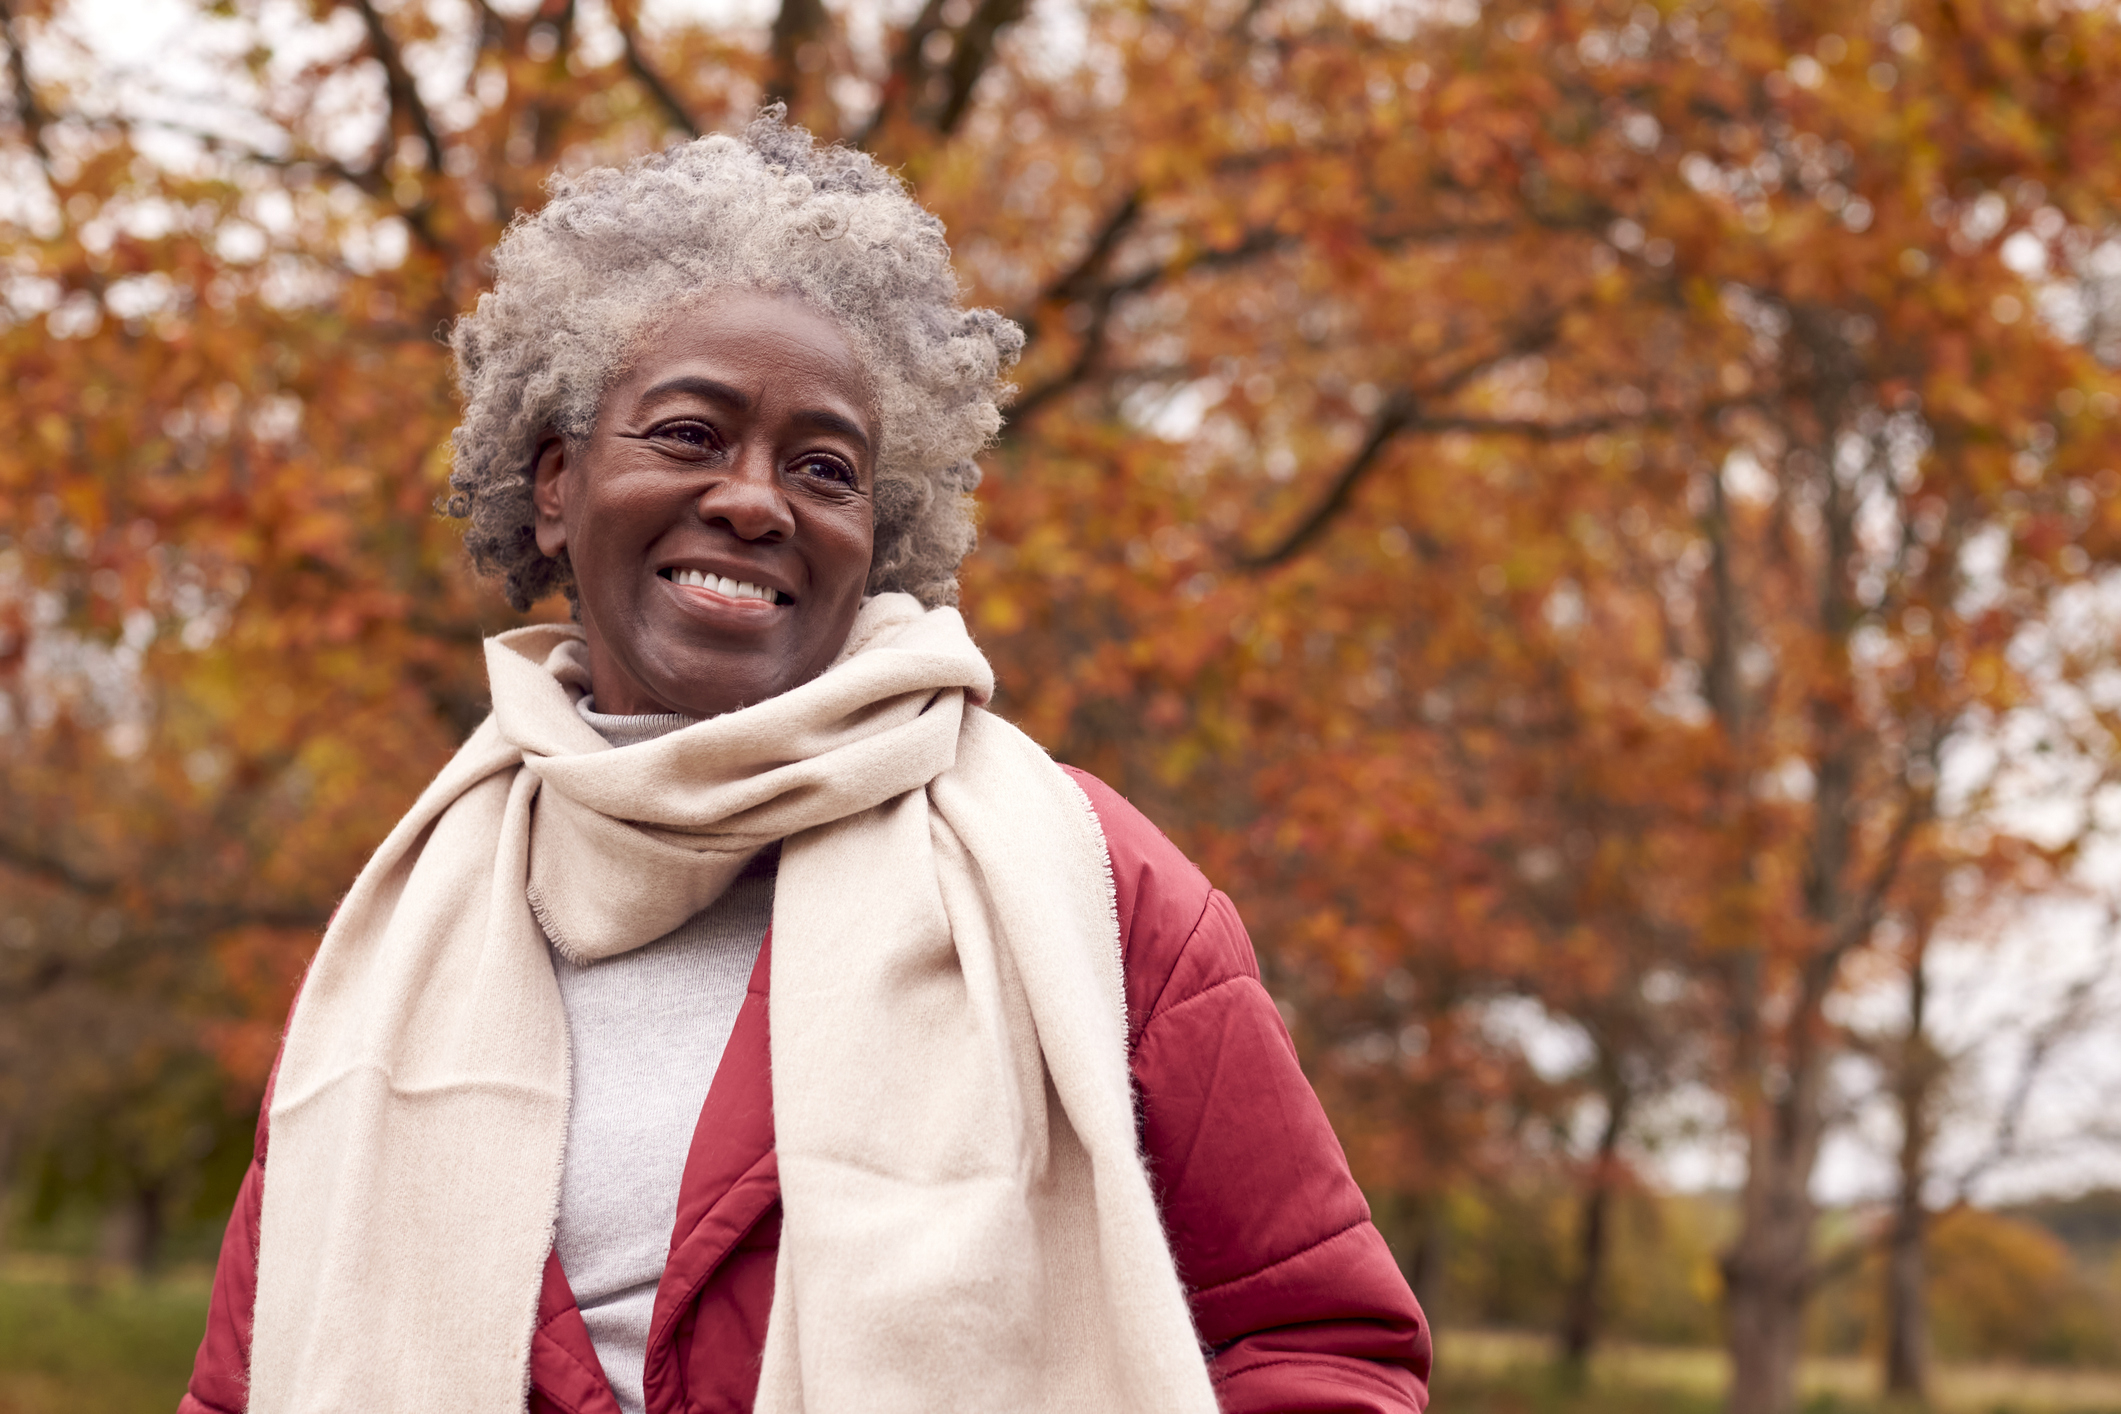 Smiling elderly woman with a scarf, outdoors with autumn trees in the background